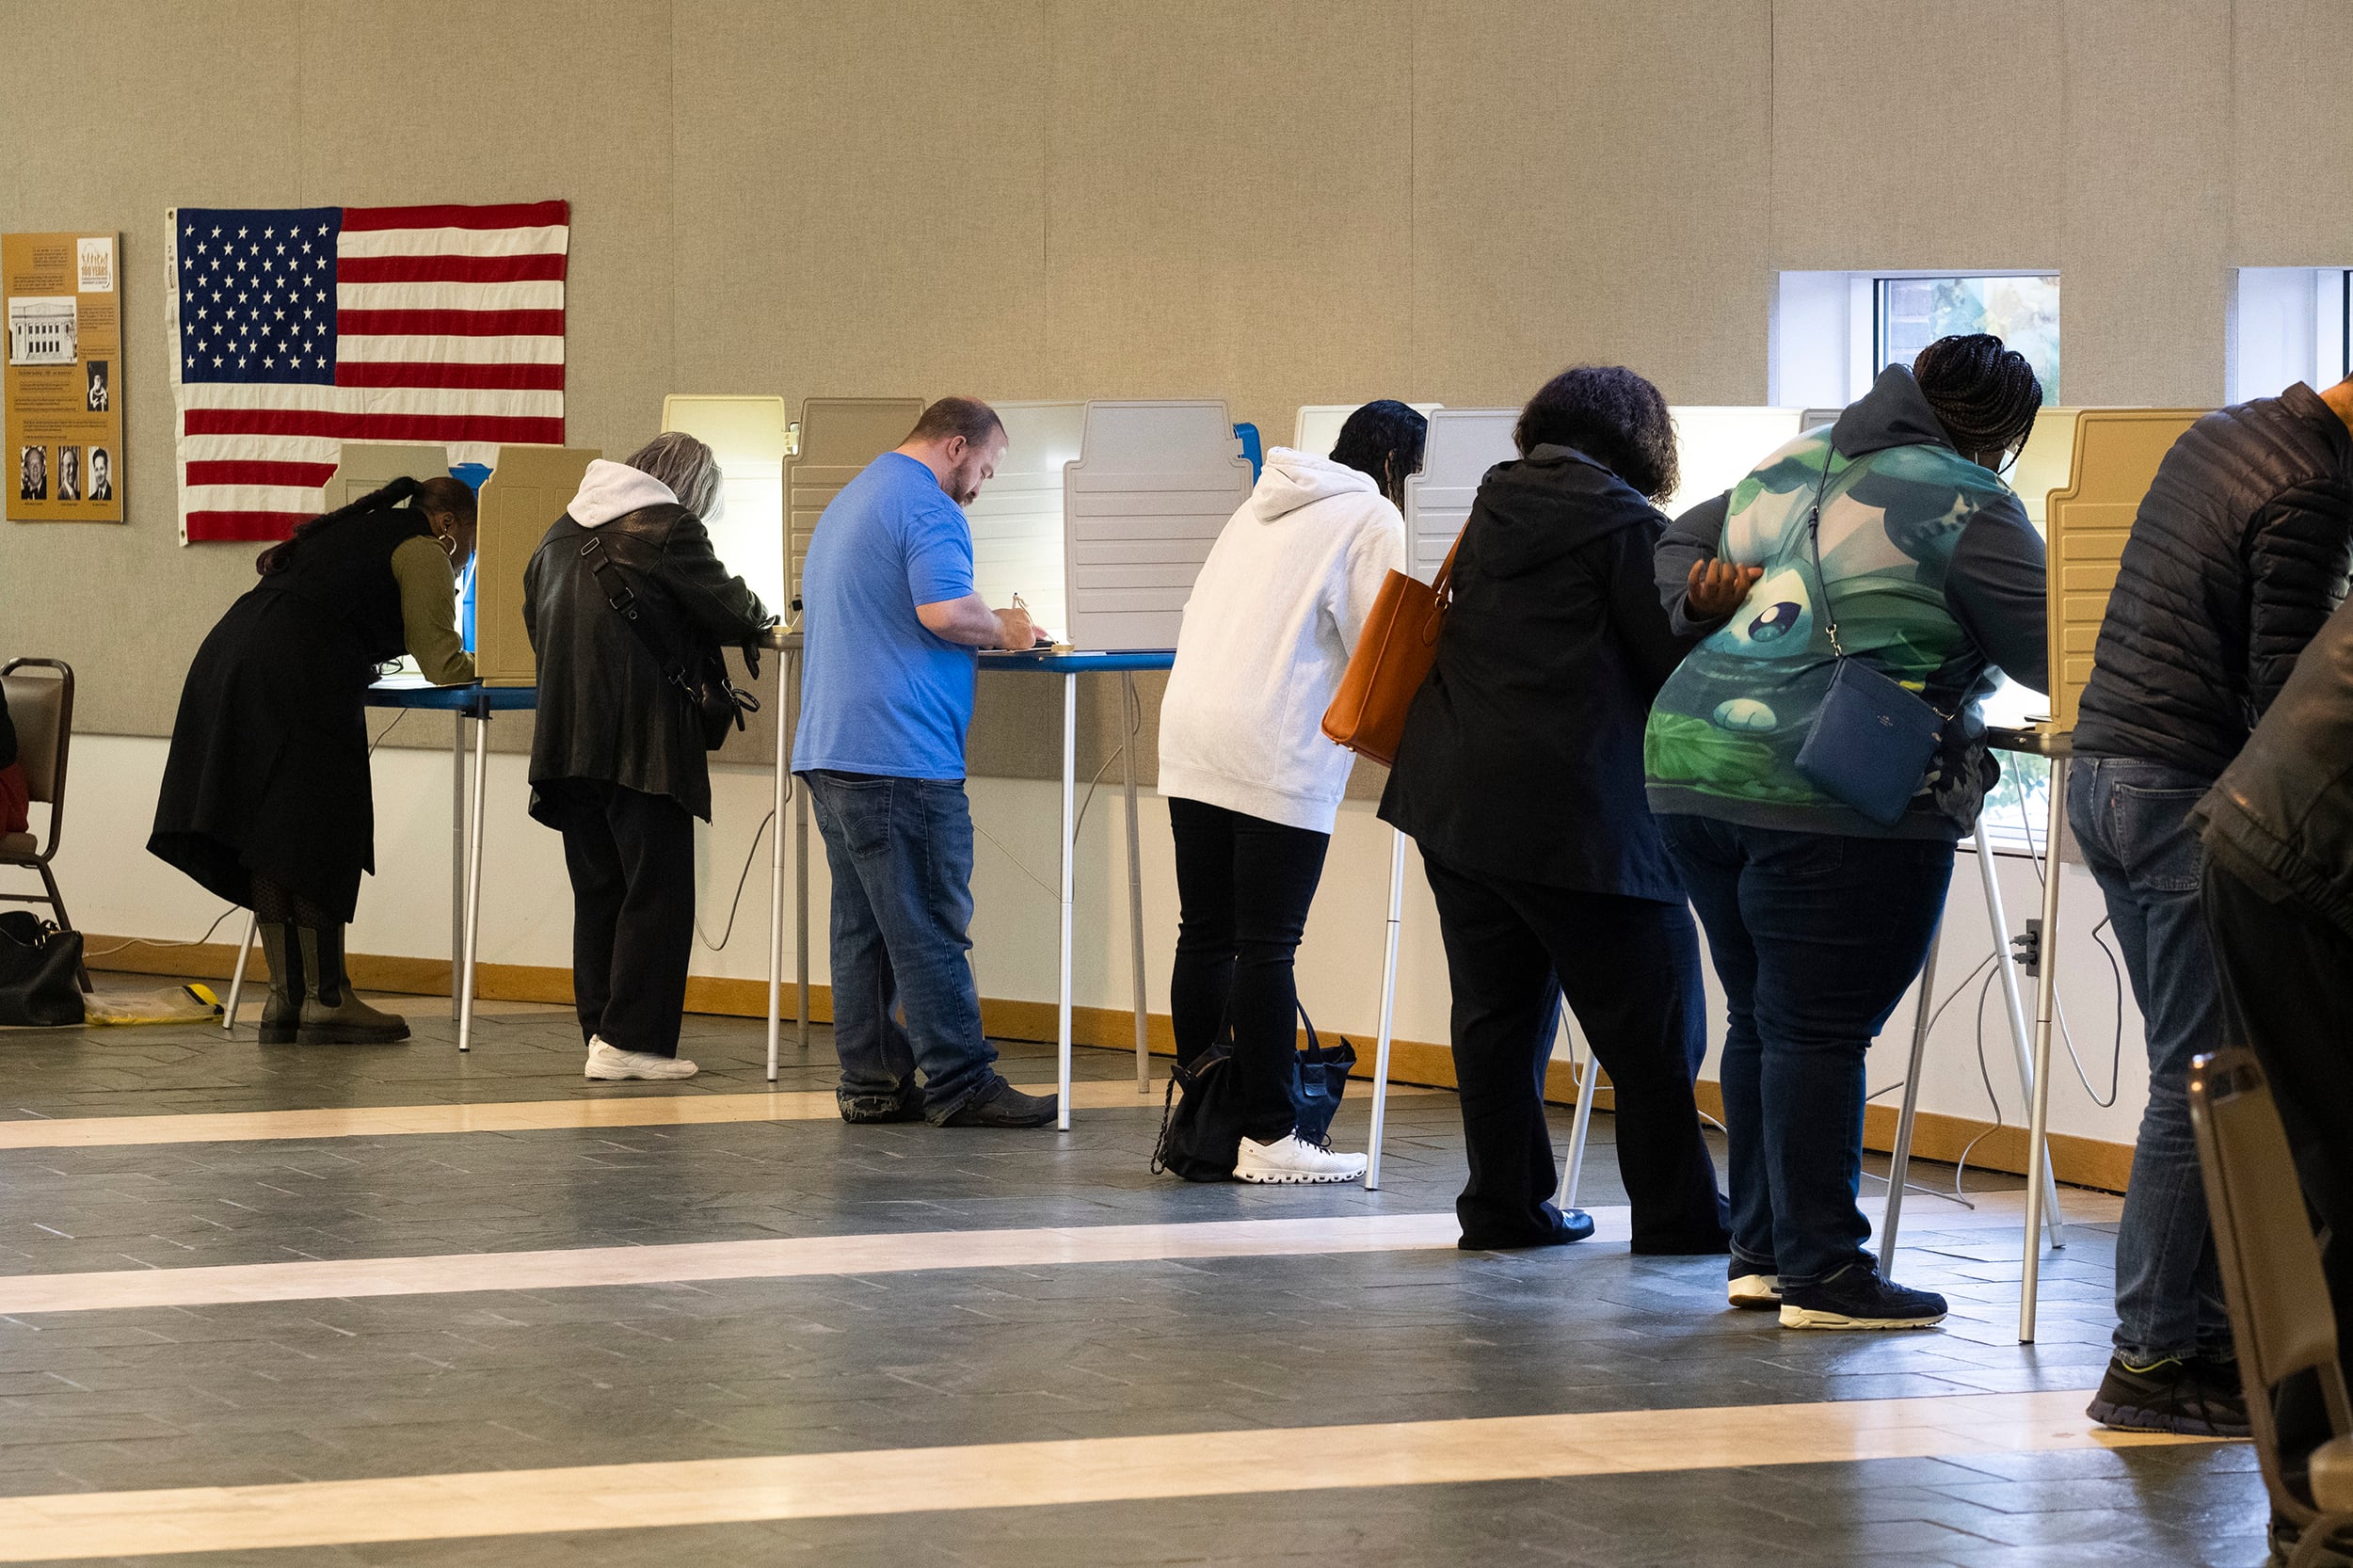 A line of people stand near voting boxes where they fill out their ballots in a room with tan walls and an American flag in the background.